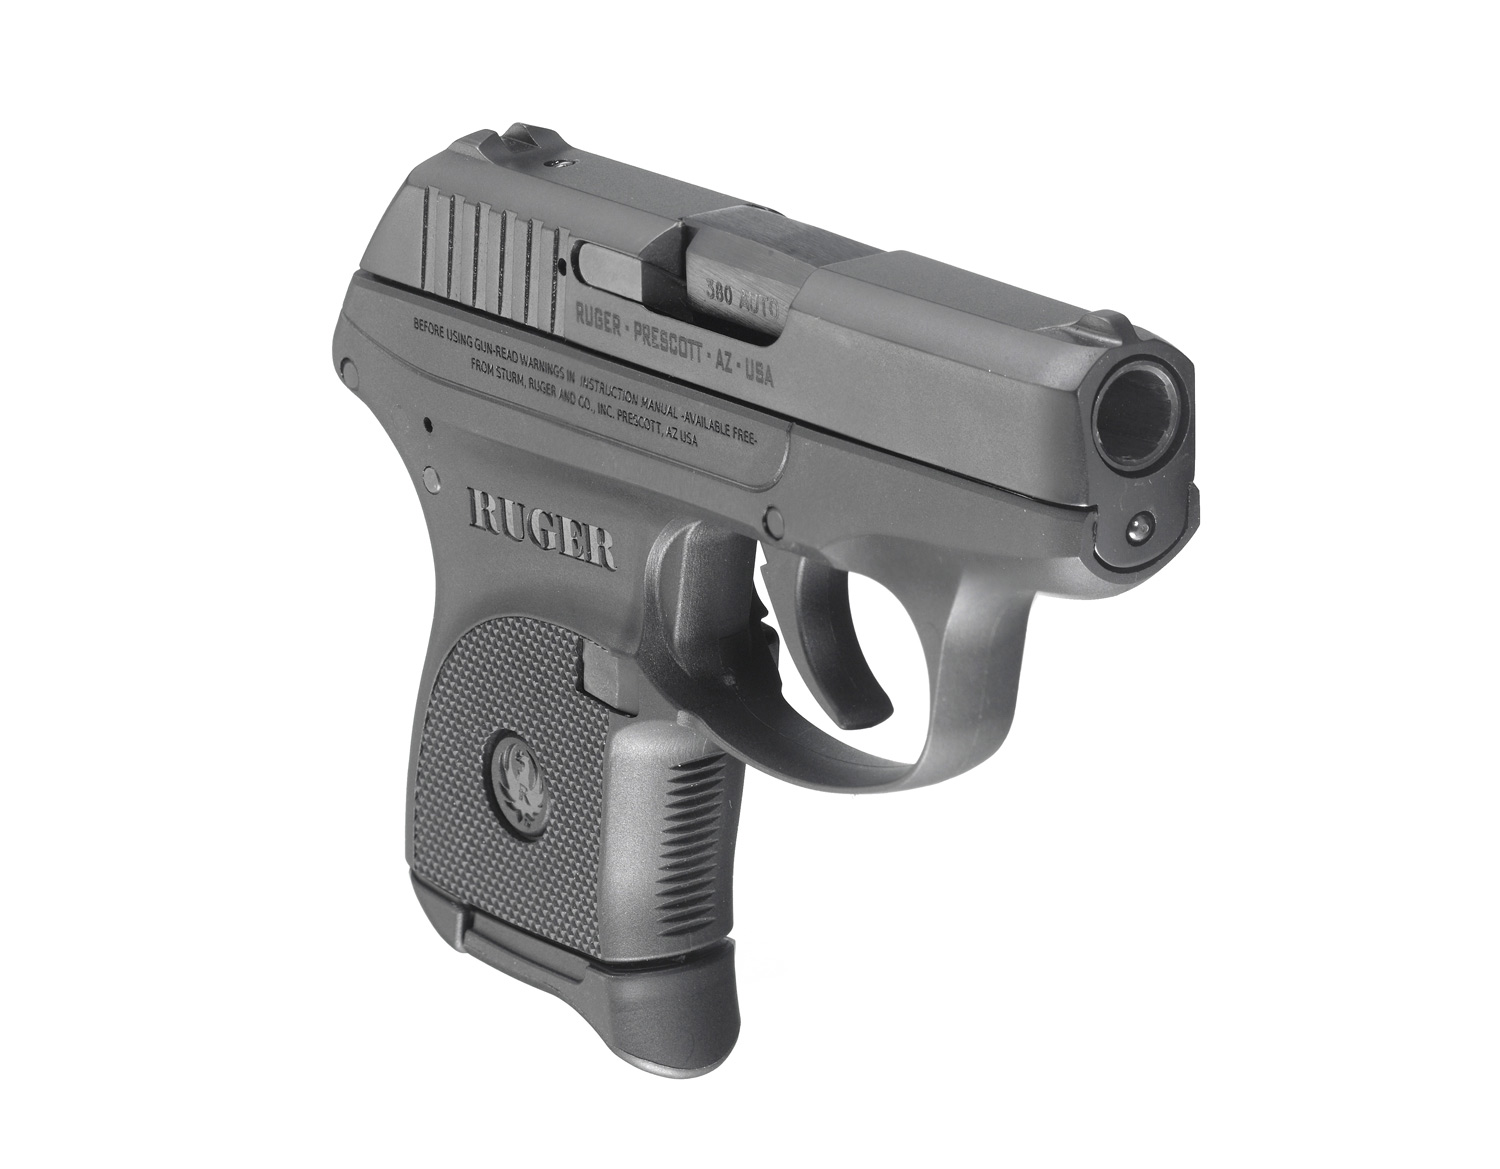 Ruger Lcp 380 Auto 61 2 34 Barrel Blued Compact Semi Automatic Pistol 03701 Dunns 1171